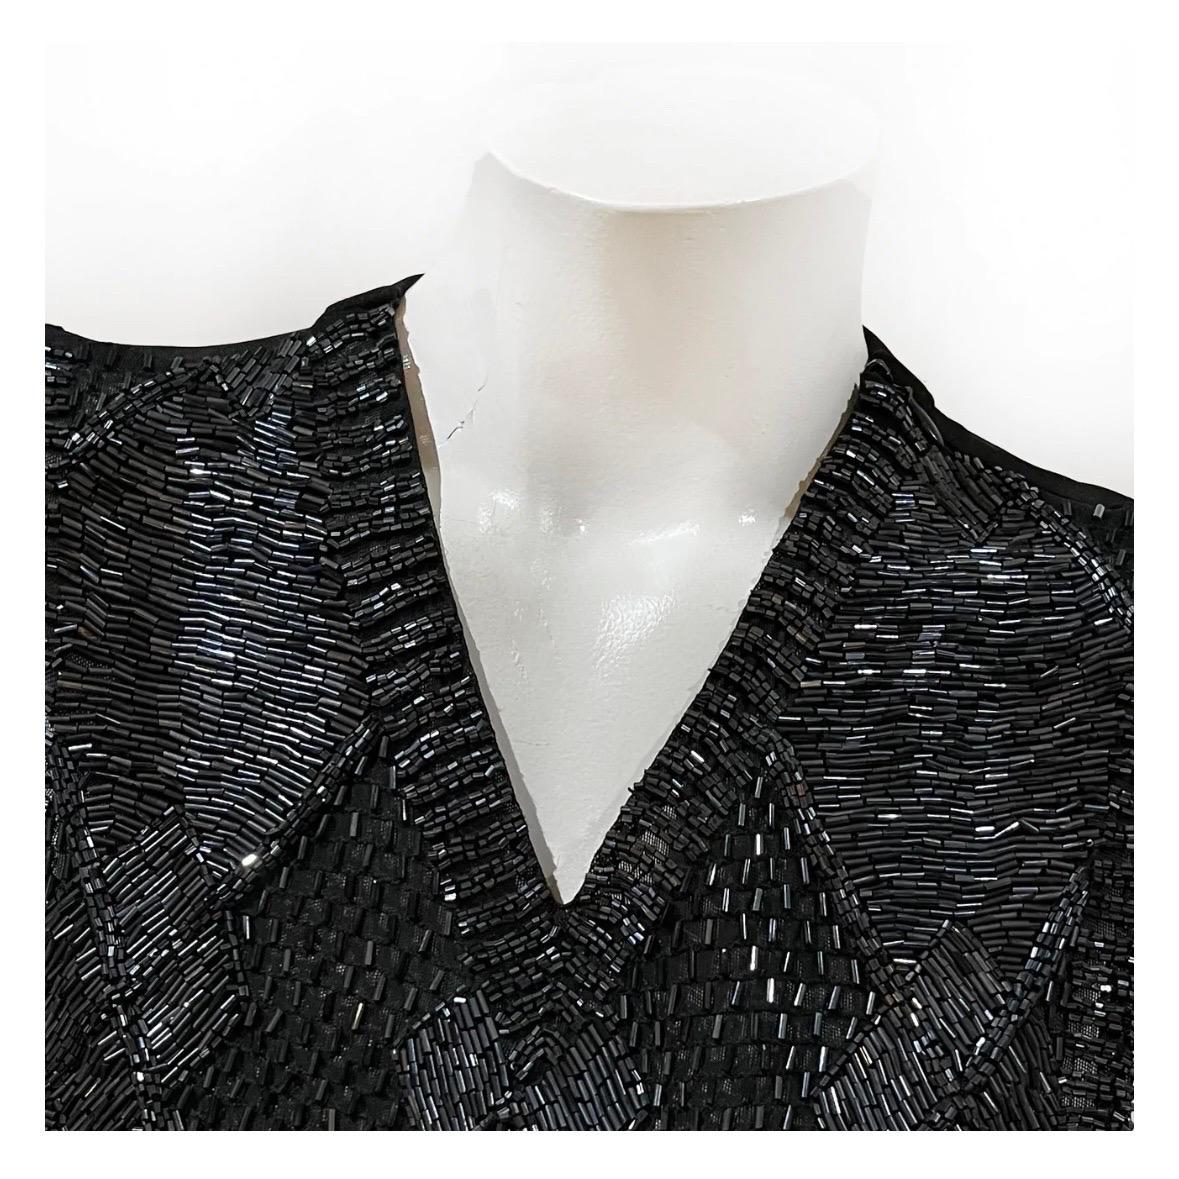 Beaded Vintage top by by Jean Paul Gaultier 
Made in Italy
Black 
V-Neck
Metallic beaded argyle embellishment covering front
Sleeveless
Functional zipper detail along left side seam and left collar
62% polyamide, 19% elastane
Condition: Excellent,